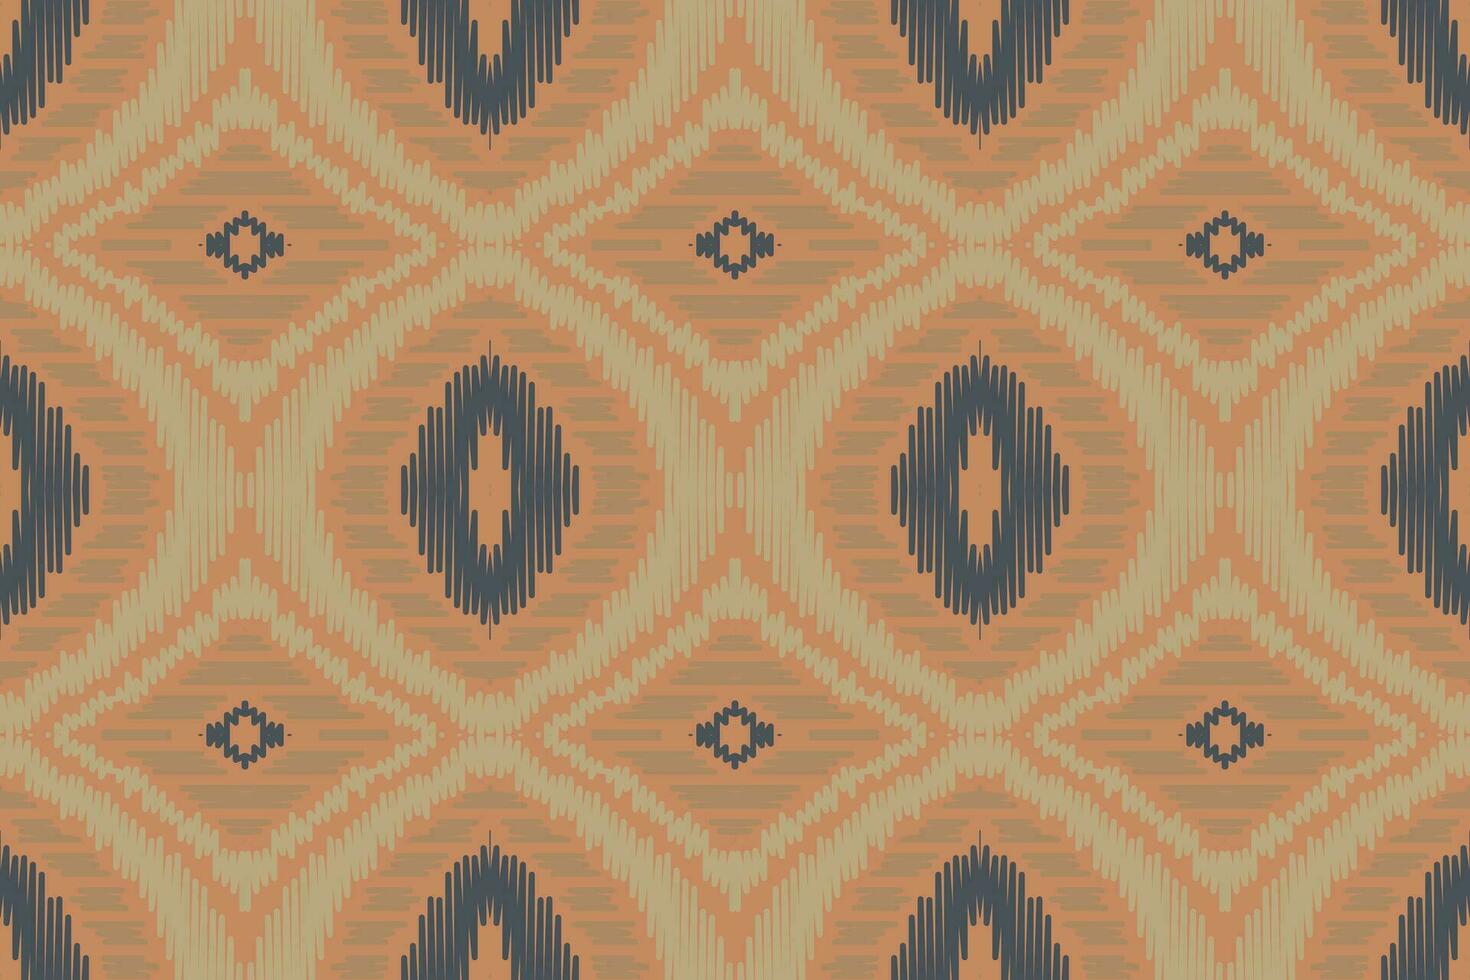 Ikat Paisley Pattern Embroidery Background. Ikat Damask Geometric Ethnic Oriental Pattern traditional.aztec Style Abstract Vector illustration.design for Texture,fabric,clothing,wrapping,sarong.